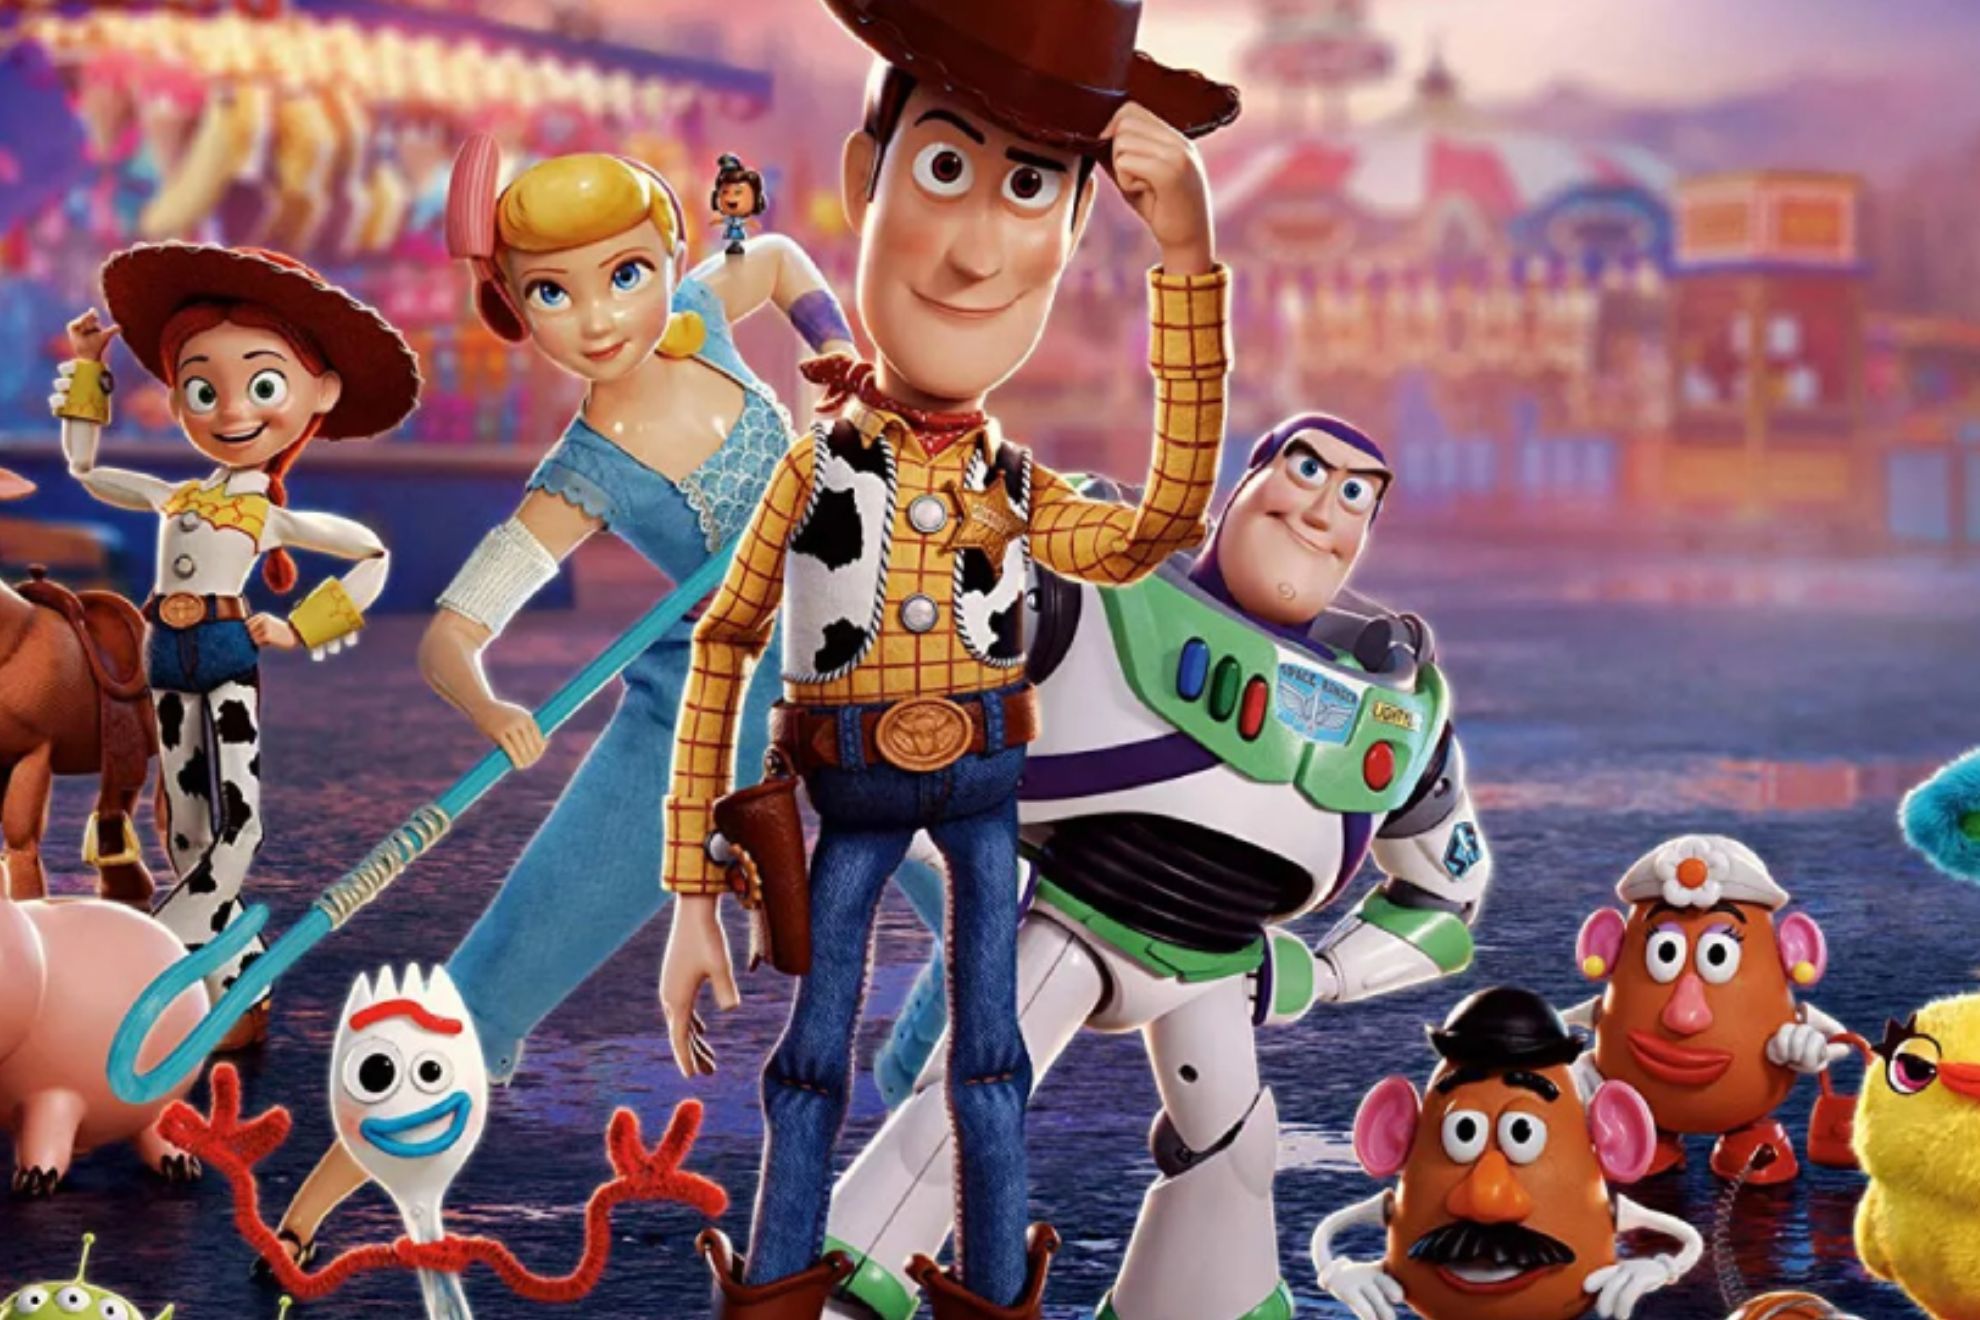 Disney confirms Toy Story 5 release date